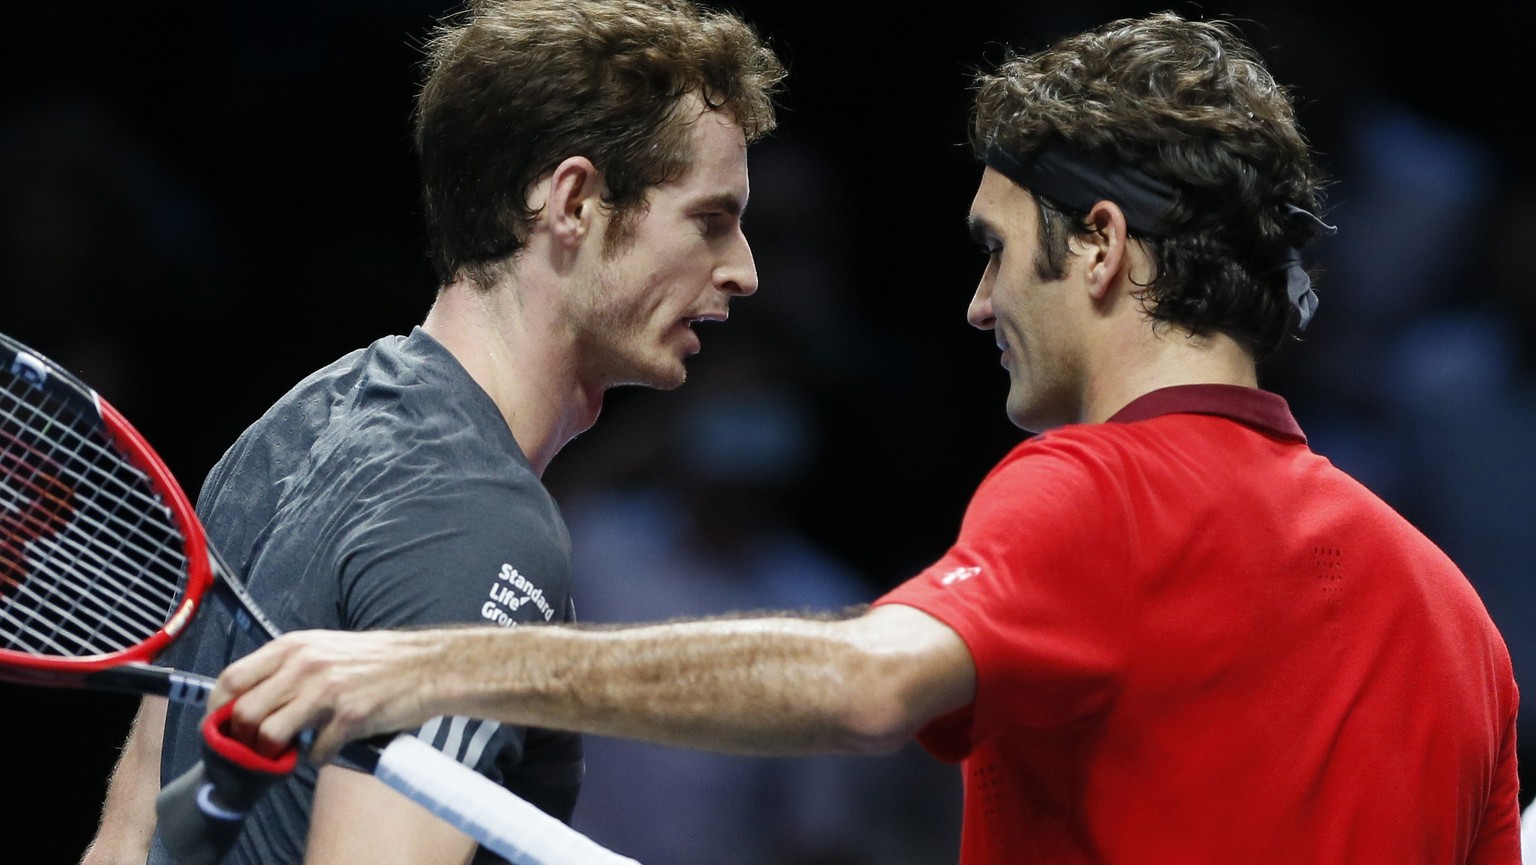 Roger Federer of Switzerland (R) embraces Andy Murray of Britain (L) after defeating Murray in their tennis match at the ATP World Tour finals at the O2 Arena in LondonNovember 13, 2014. REUTERS/Stefa ...